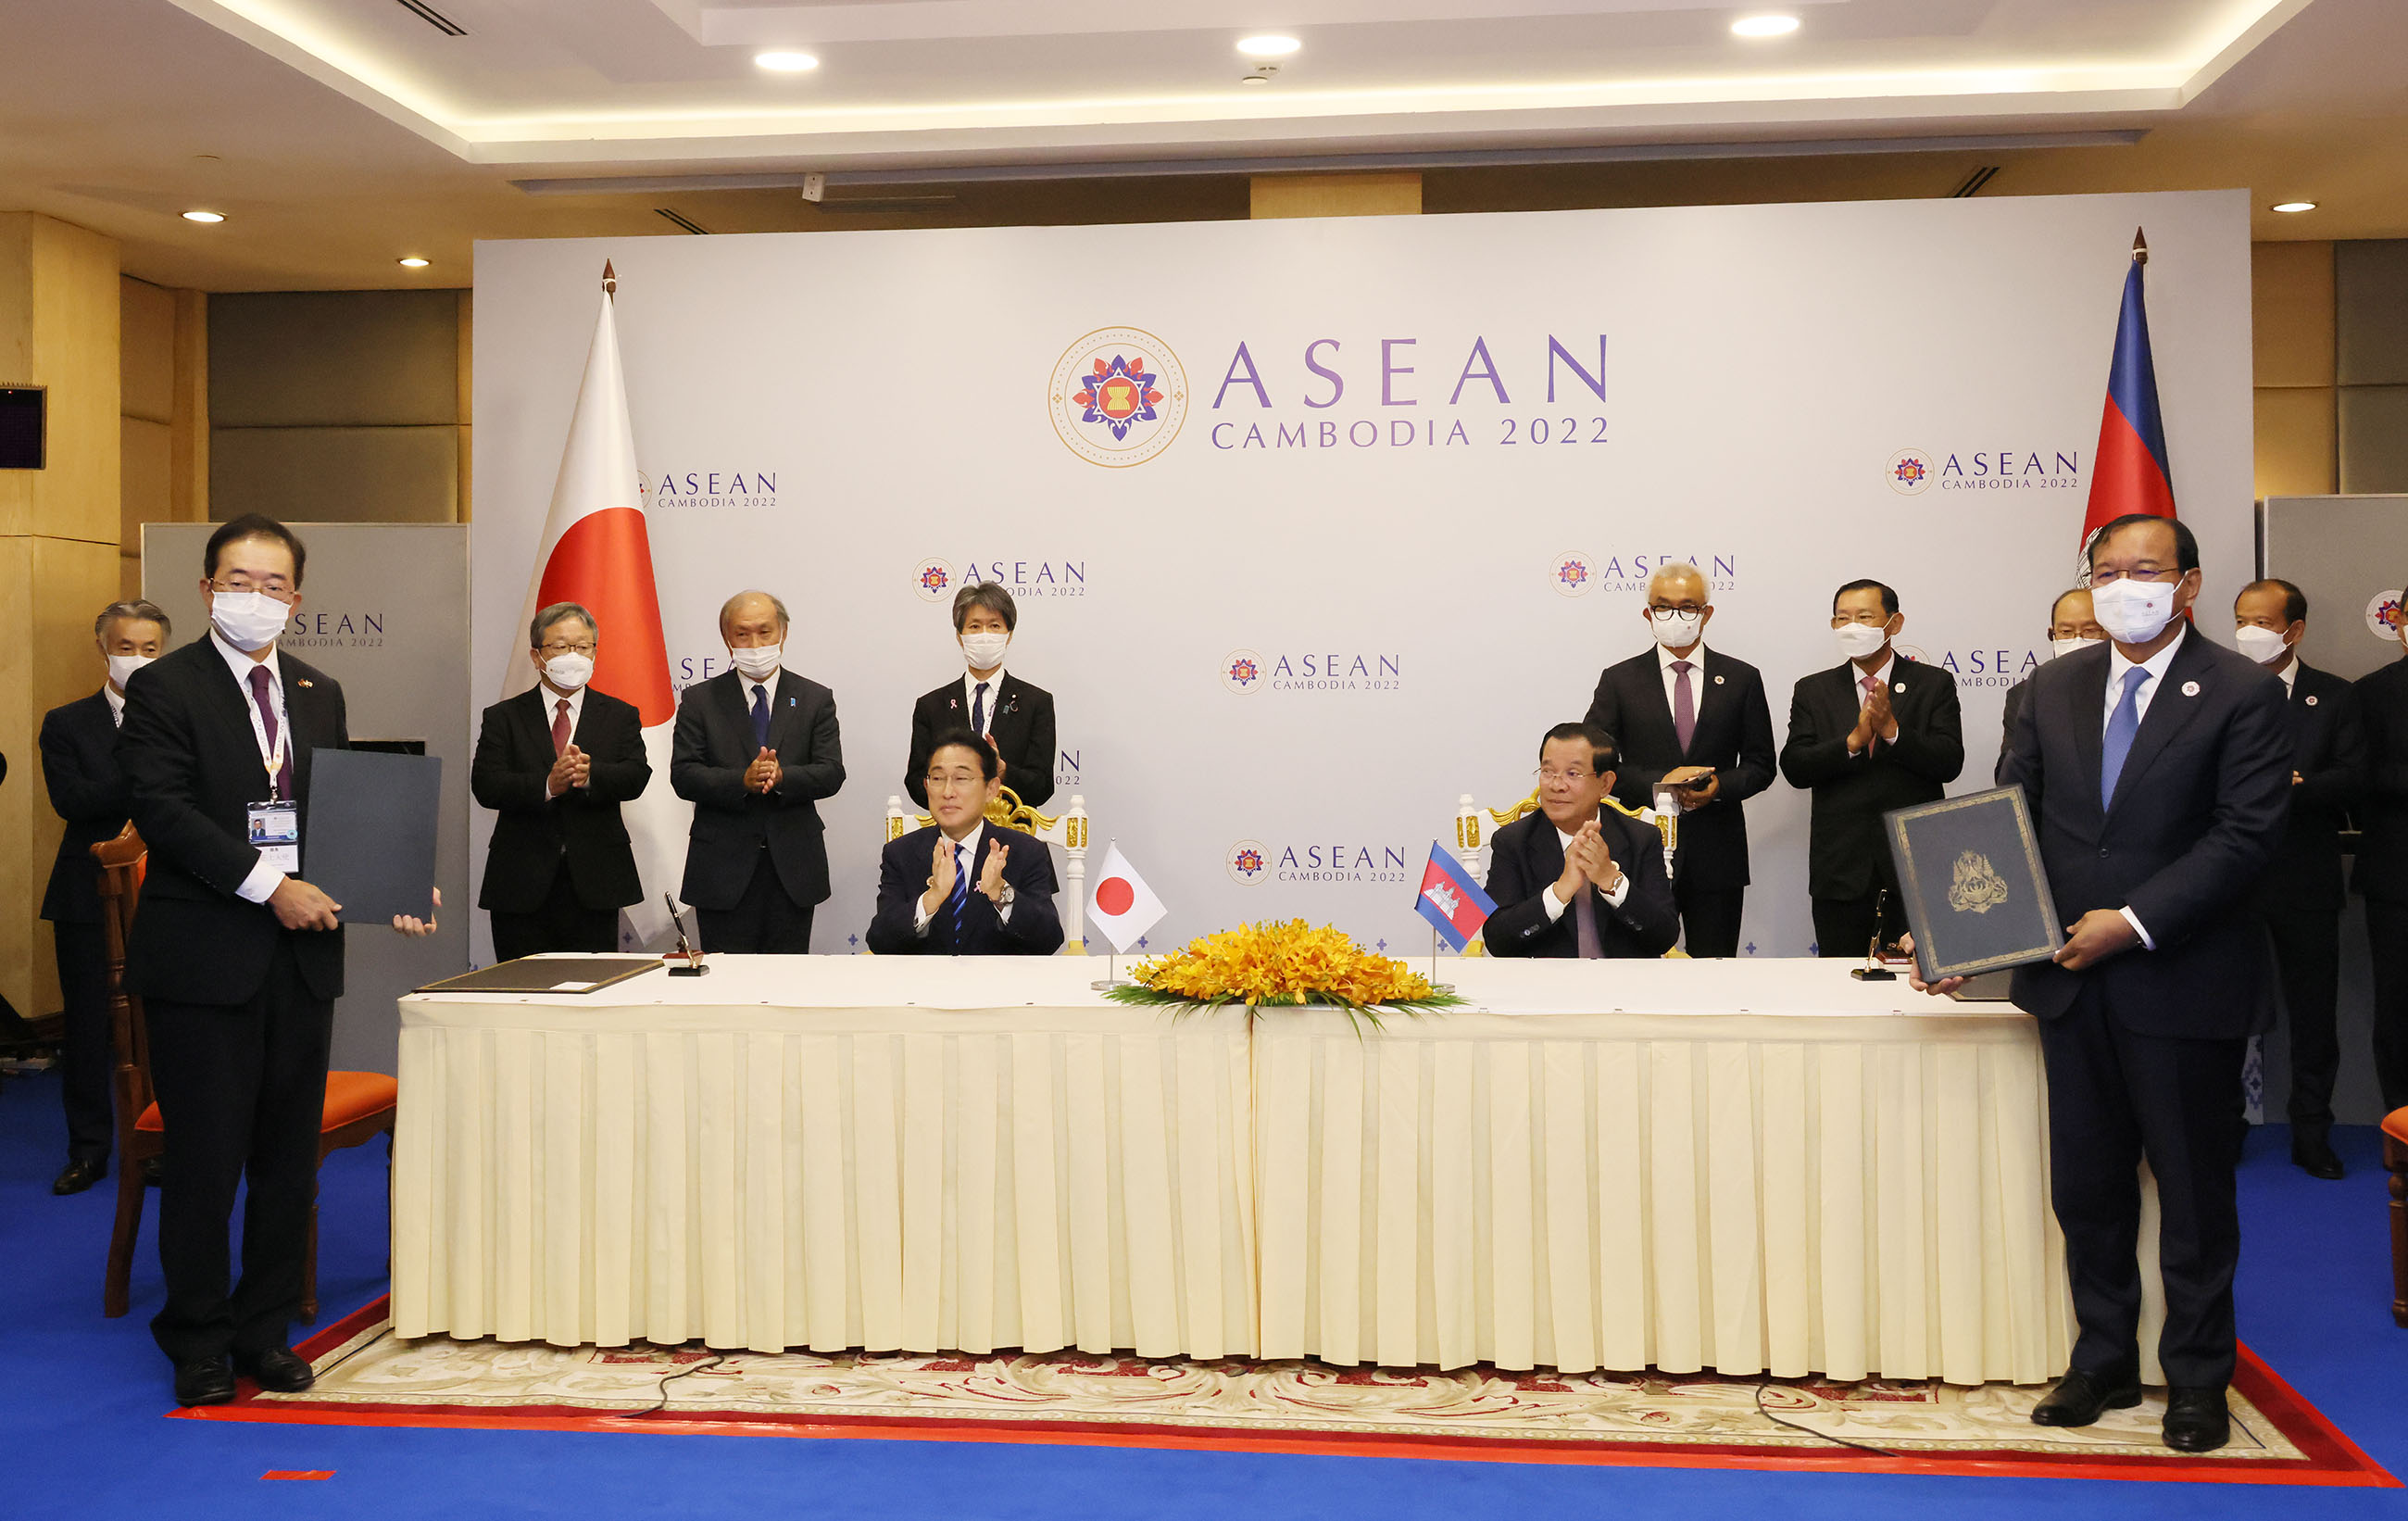 Photograph of the leaders presiding over a signing ceremony (1)